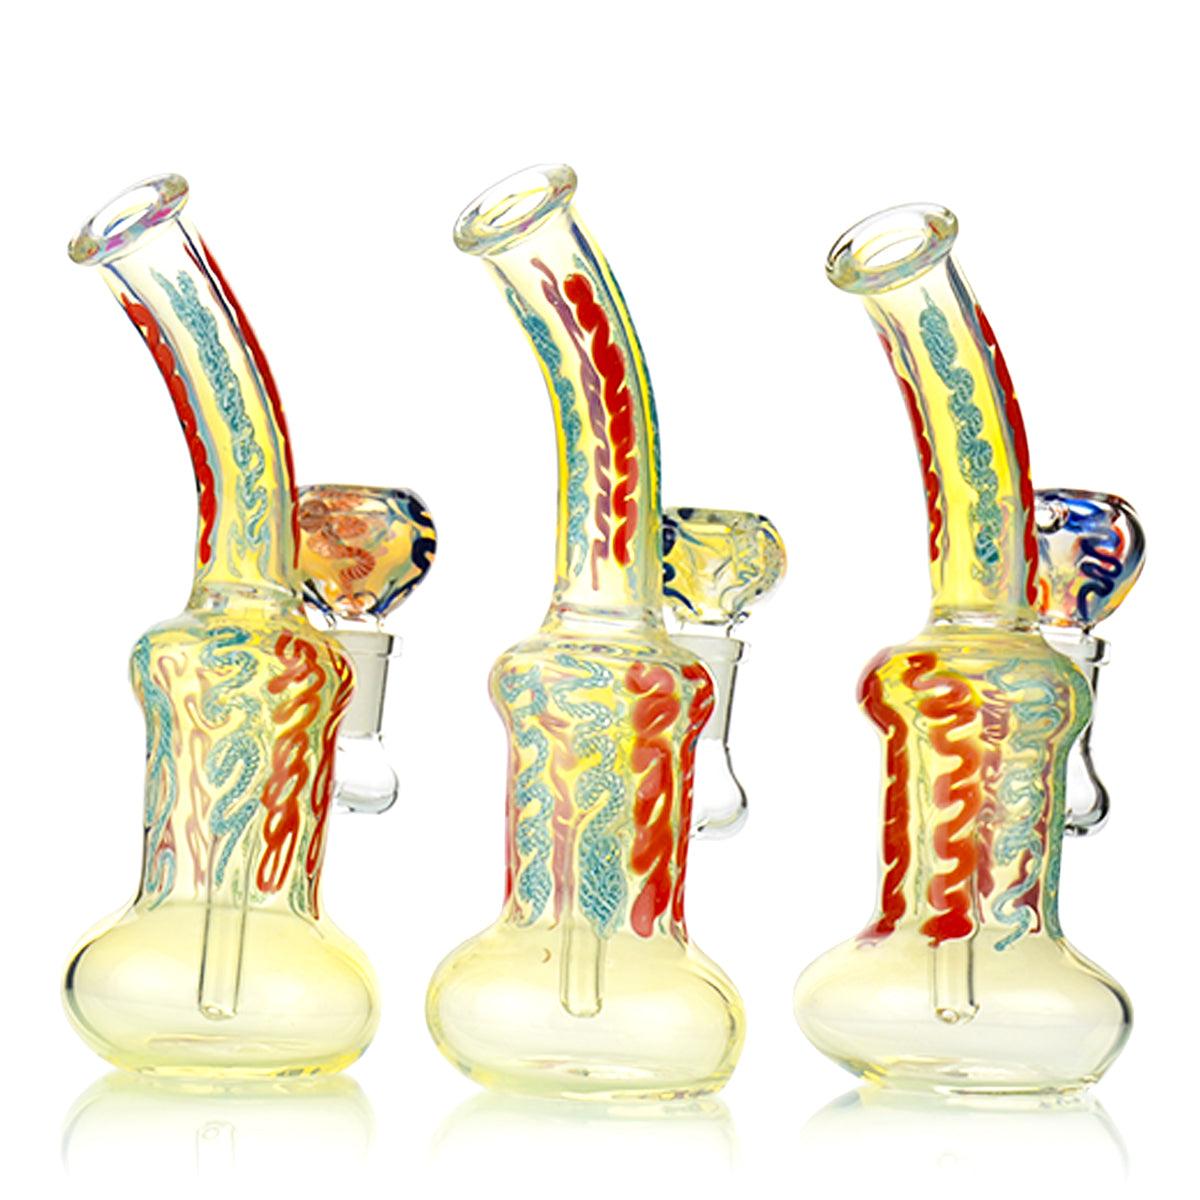 8" Water Pipe Inside Color Twisting Bong 14mm Male Bowl Included APROX 200 Grams - LA Wholesale Kings